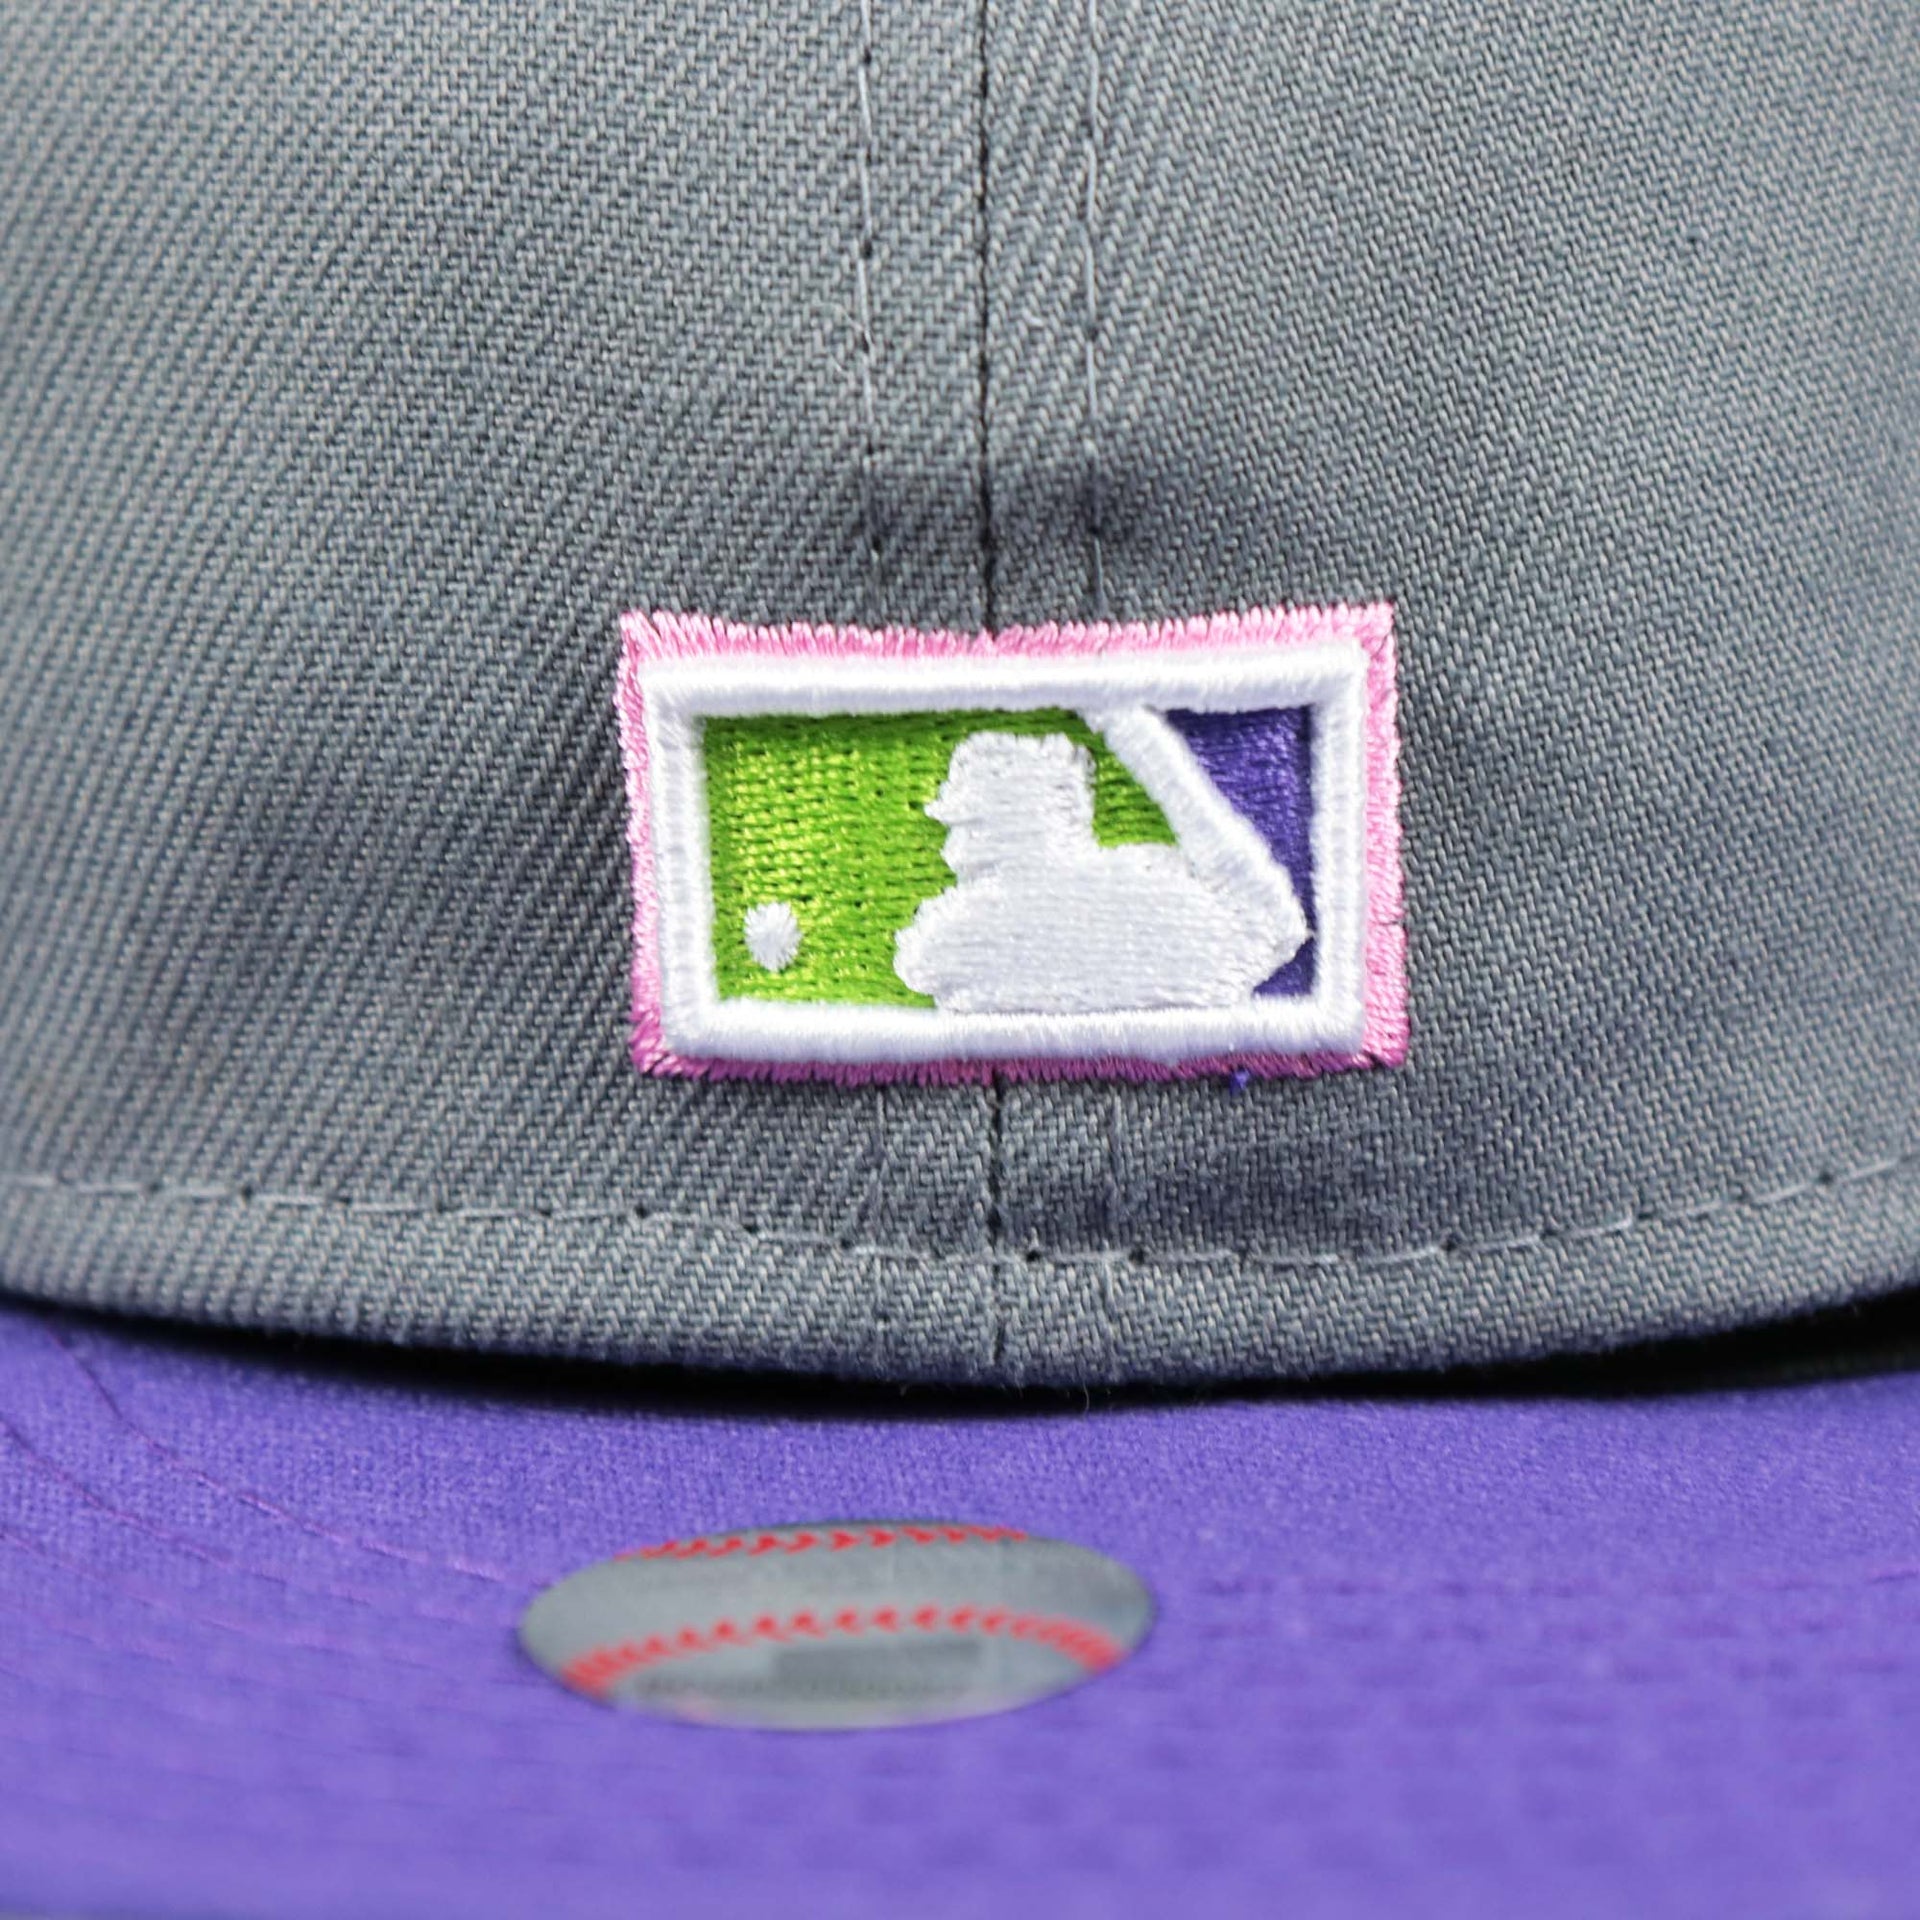 The Cooperstown MLB Batterman Logo on the Cooperstown Philadelphia Phillies 1996 All Star Game Liberty Bell Side Patch 59Fifty Fitted Cap | Bel-Air Pack Storm Gray 59Fifty